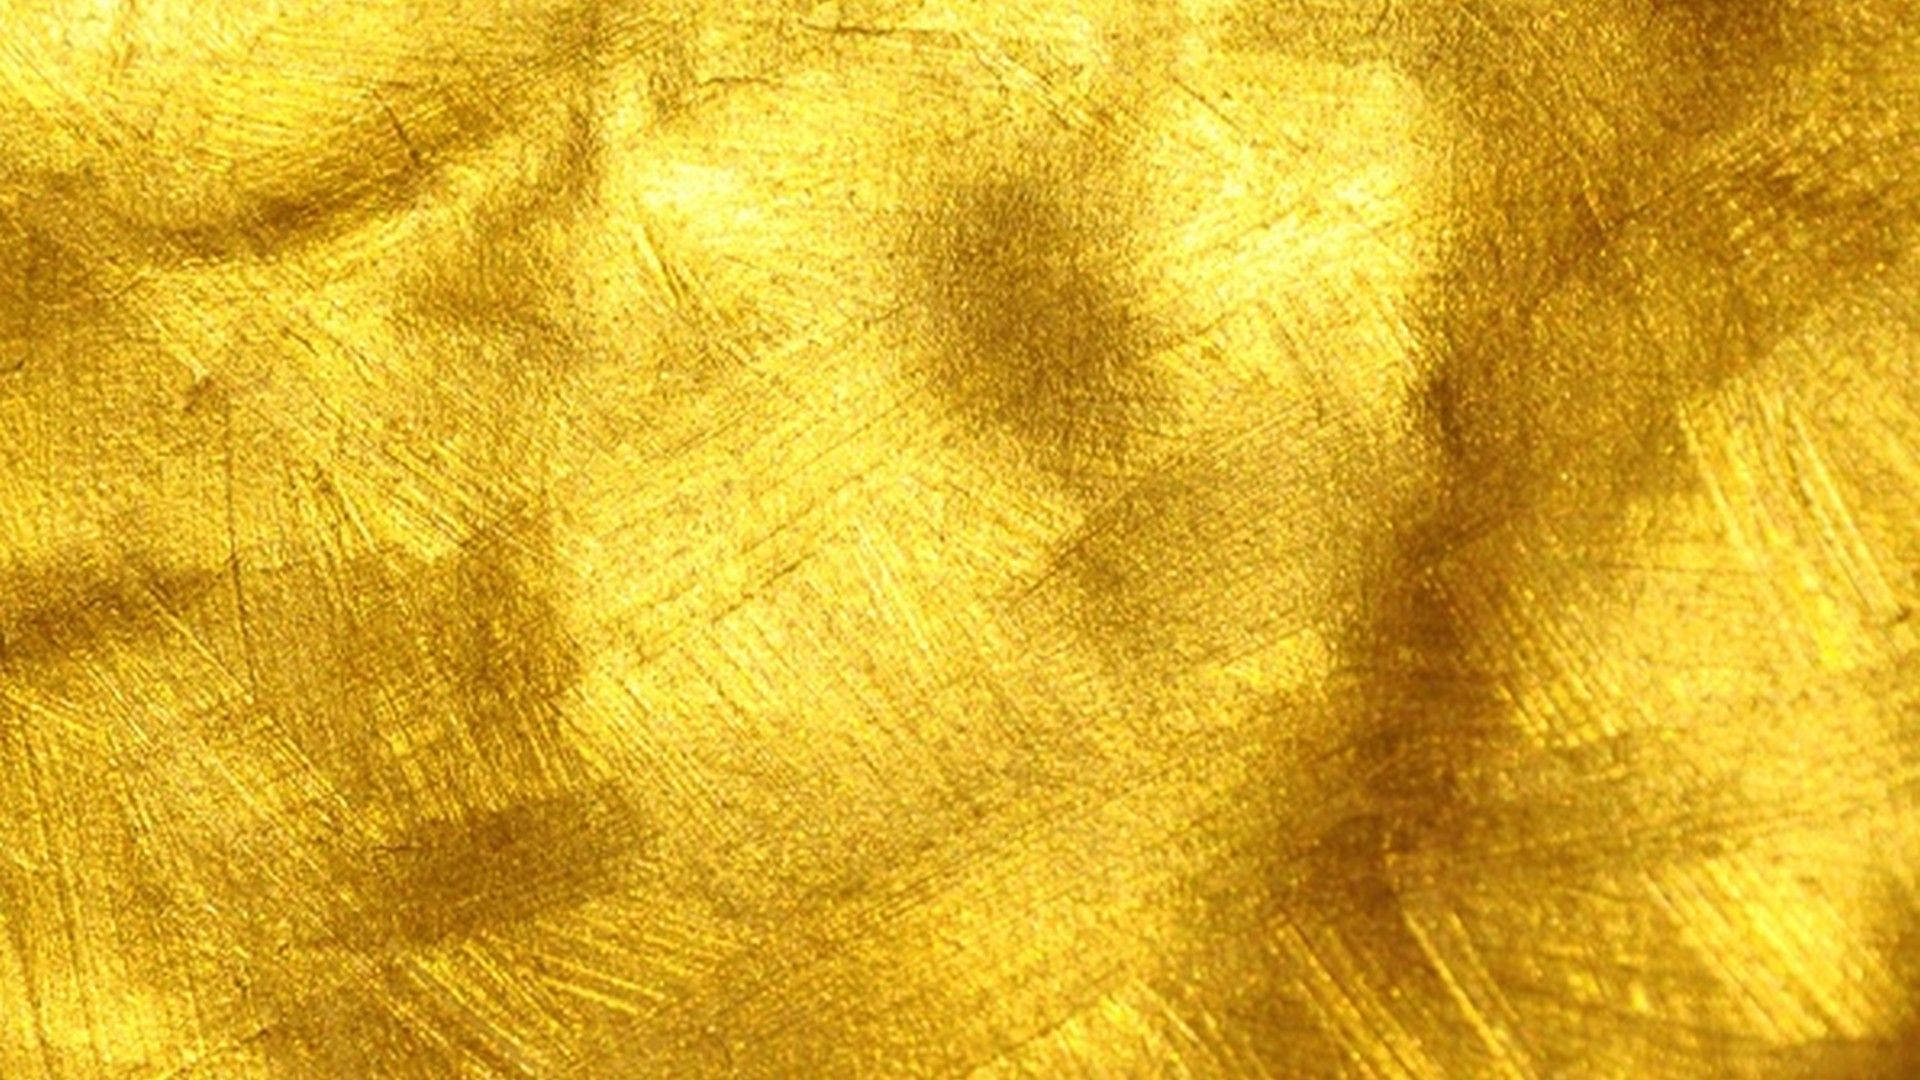 Plain Gold Painting With Brush Strokes Wallpaper